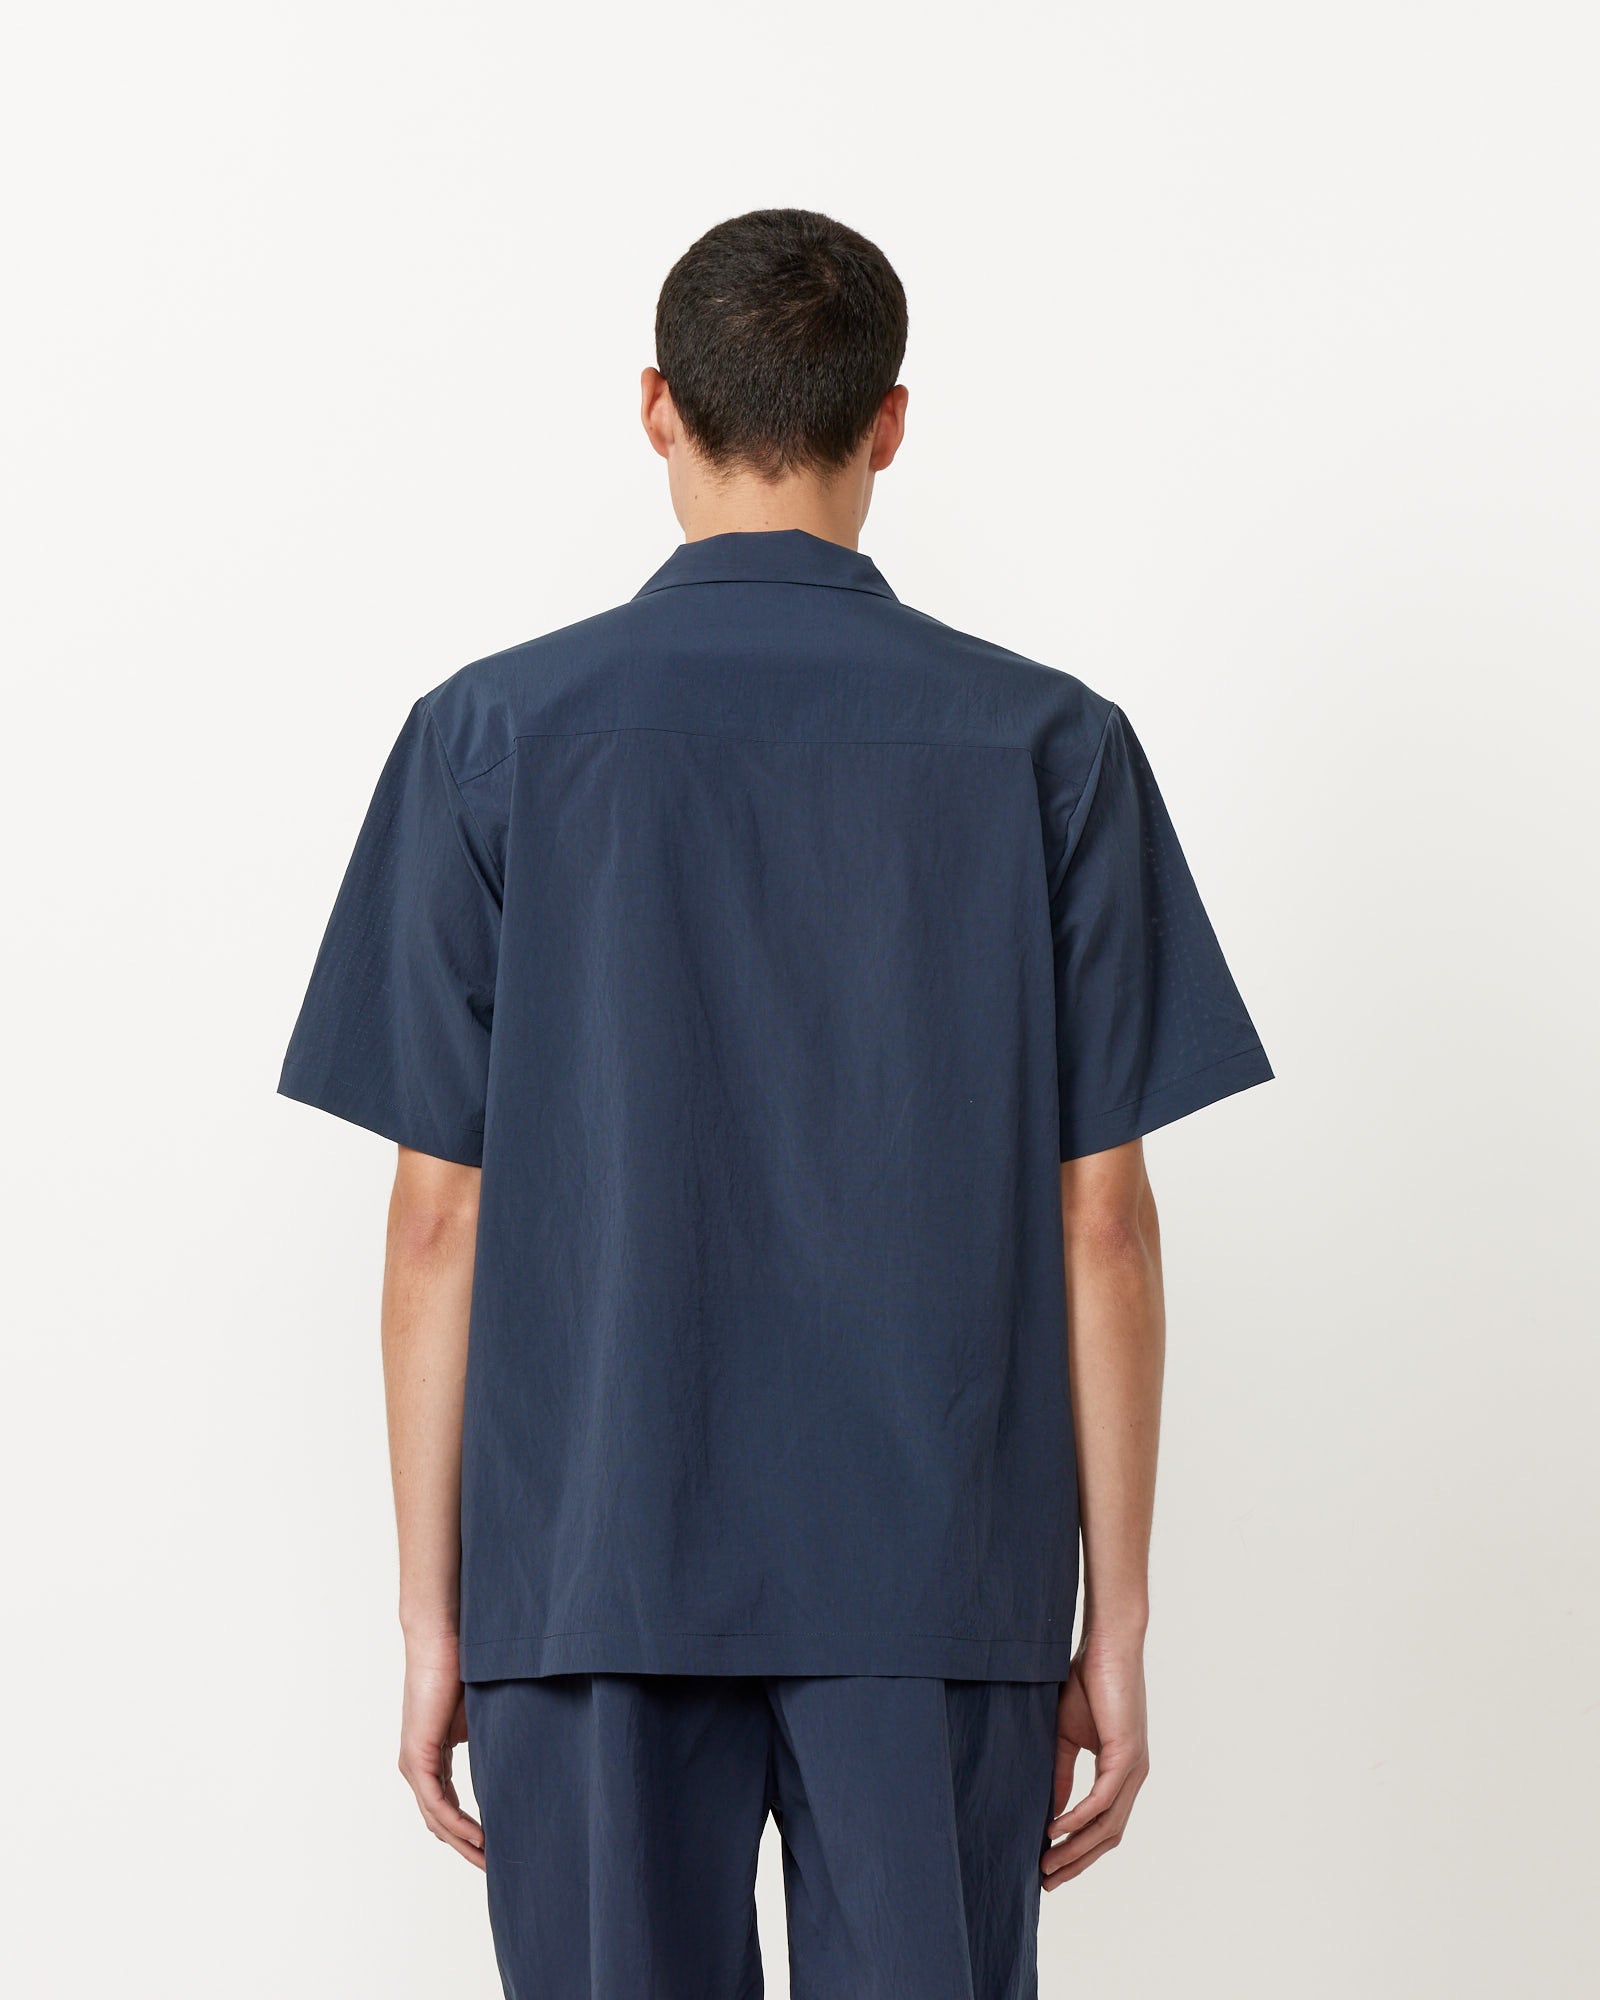 Breathable Quick Dry Shirt in Navy